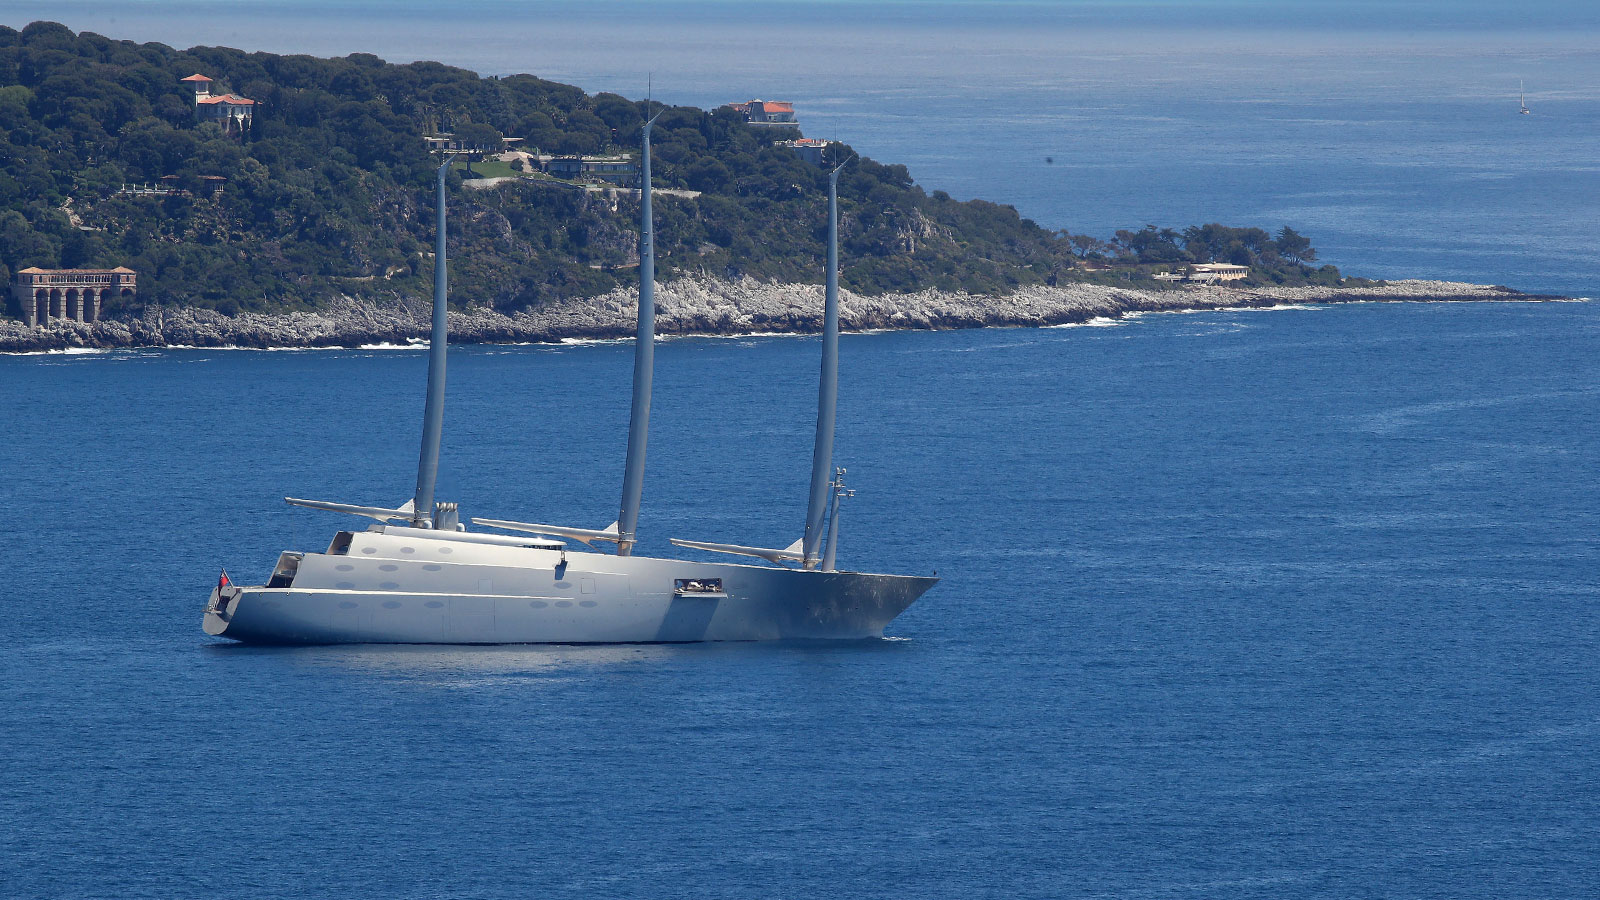 The Top Yachts To Spot | The Journal | MR PORTER